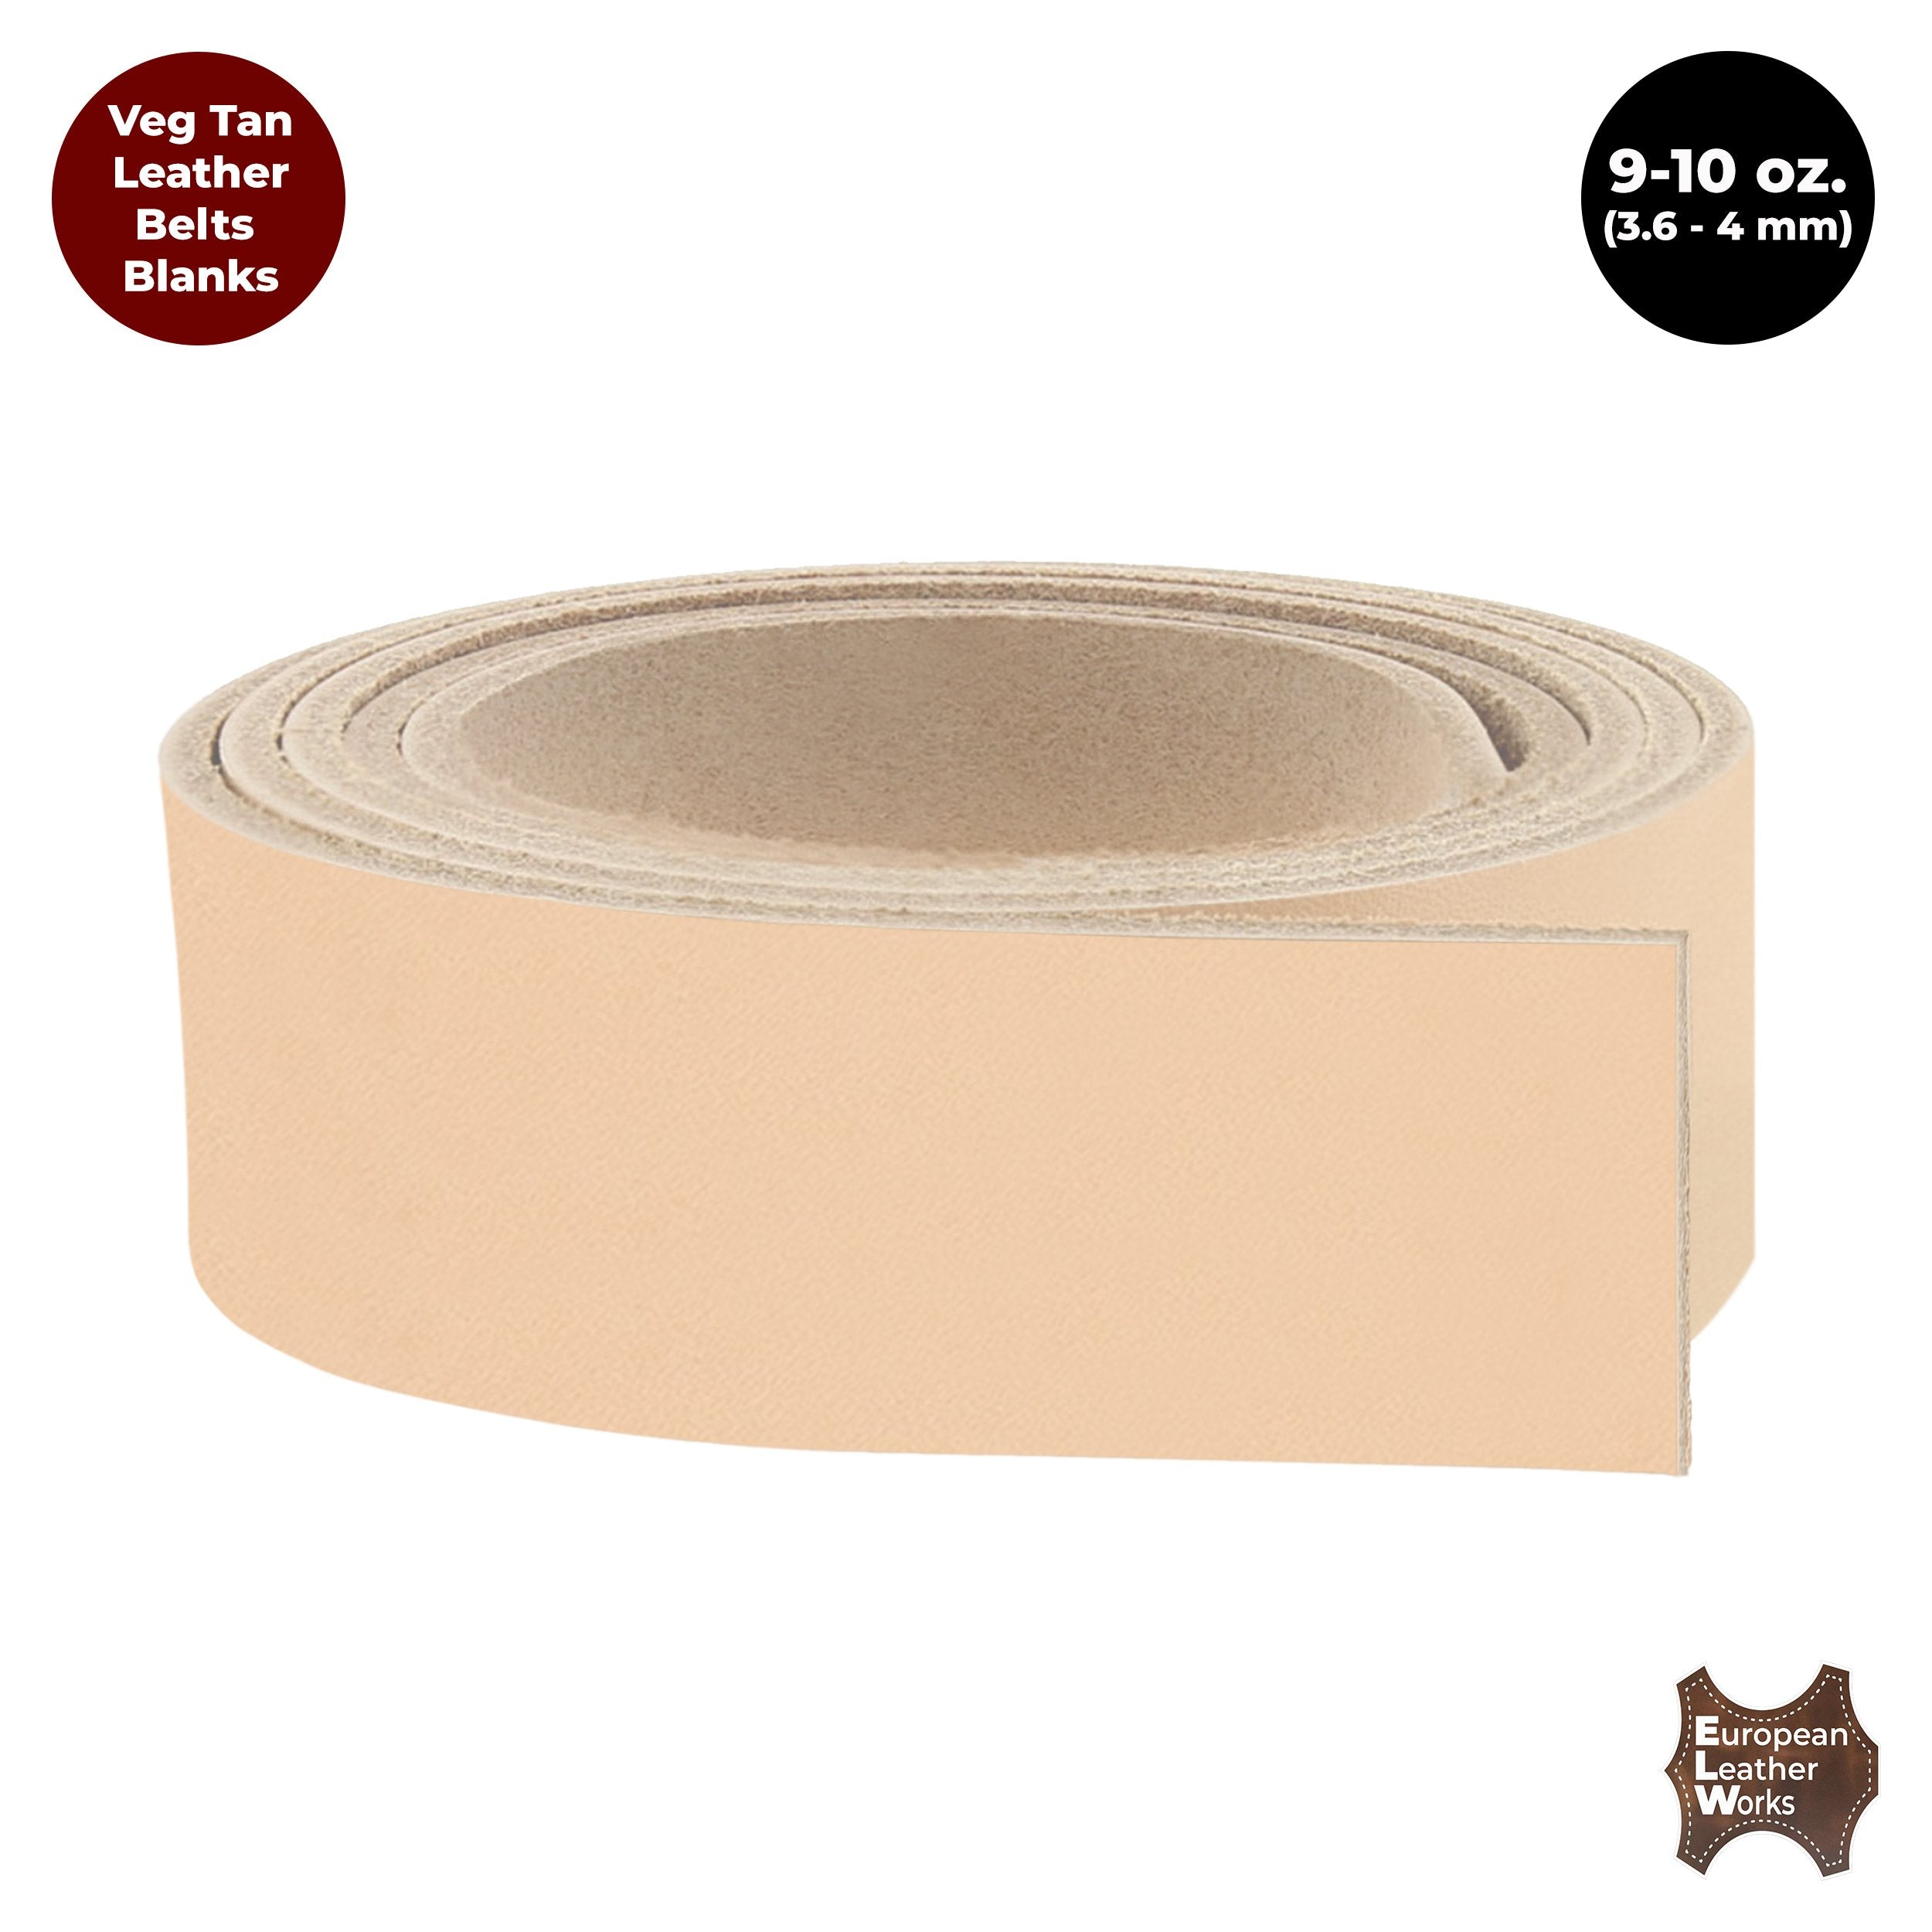 Veg Tan Tooling Leather 9/10 oz 3.6-4mm 2 Piece Special Price